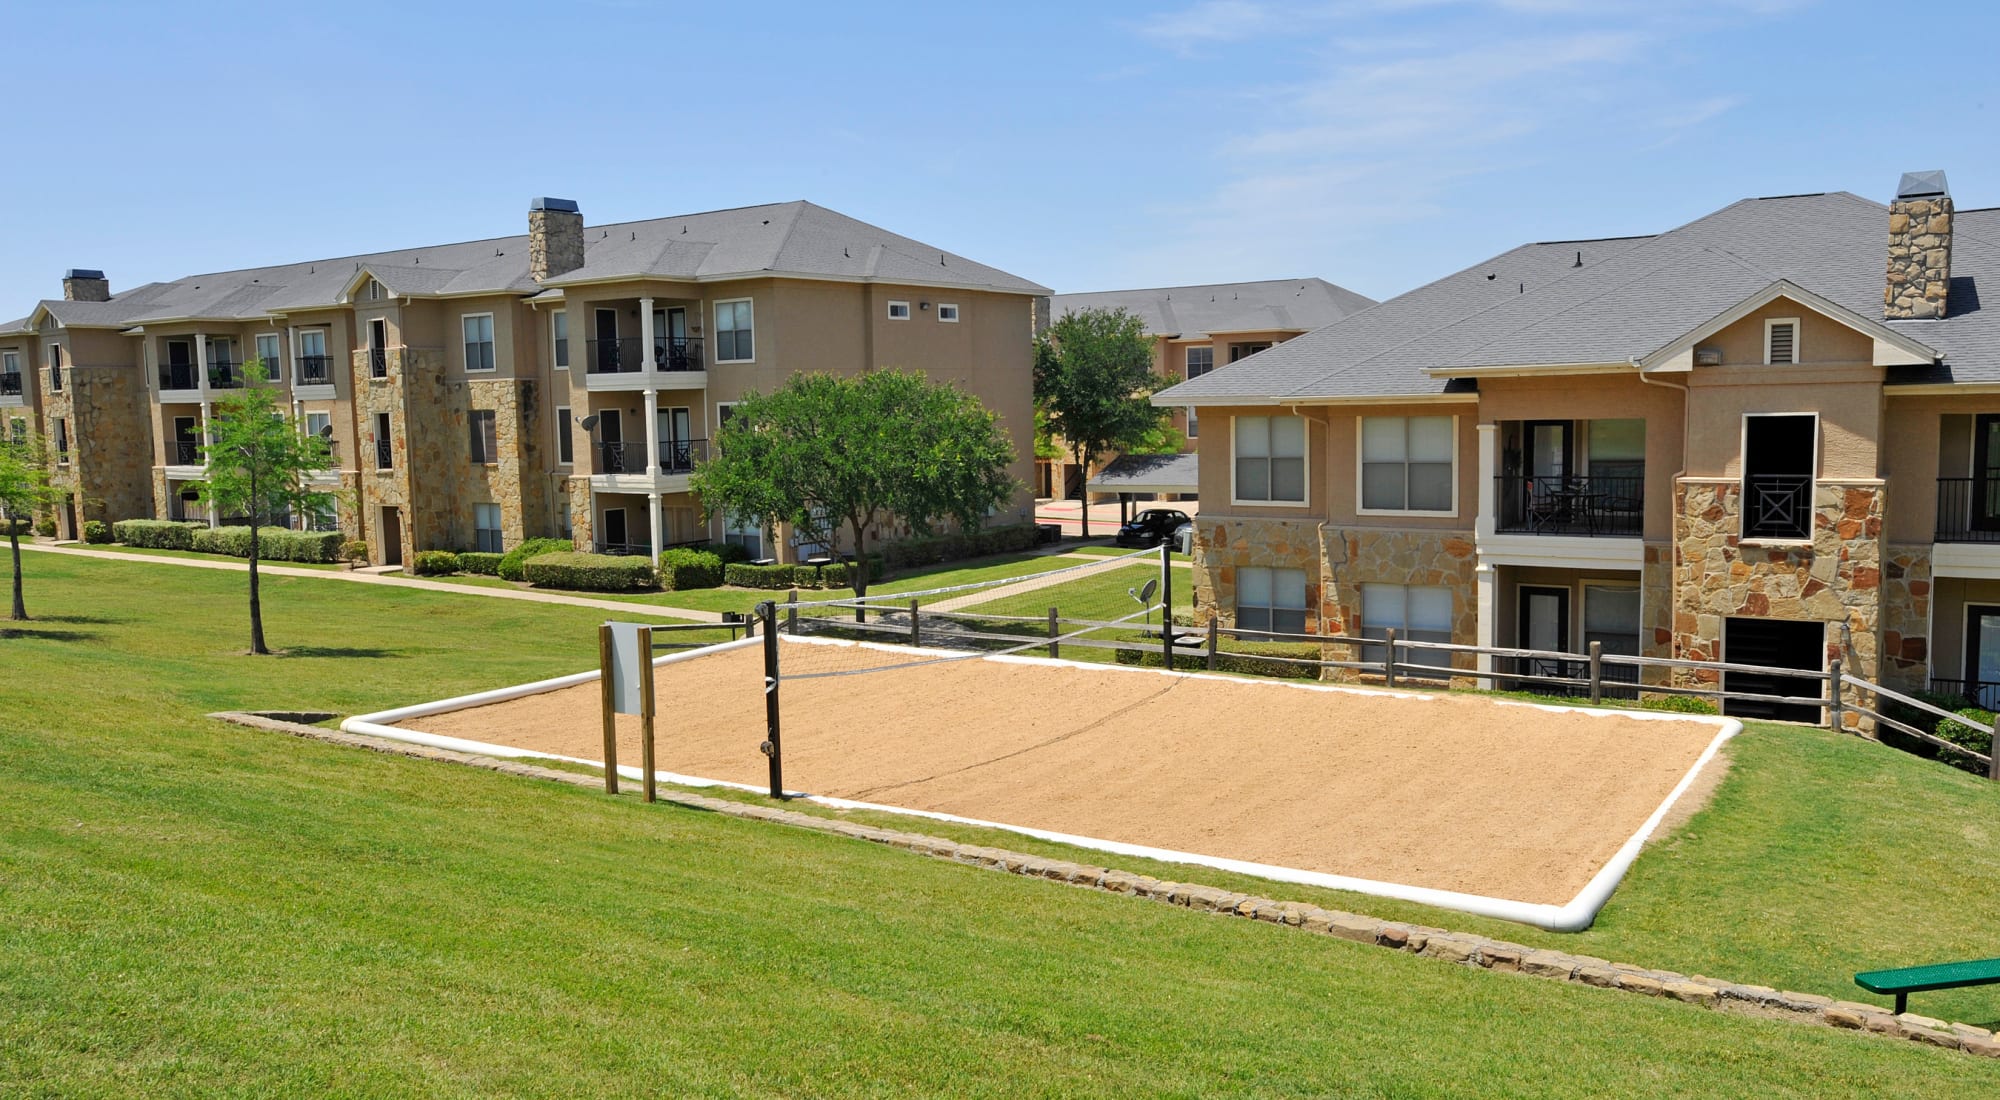 Sand volleyball court at El Lago apartments